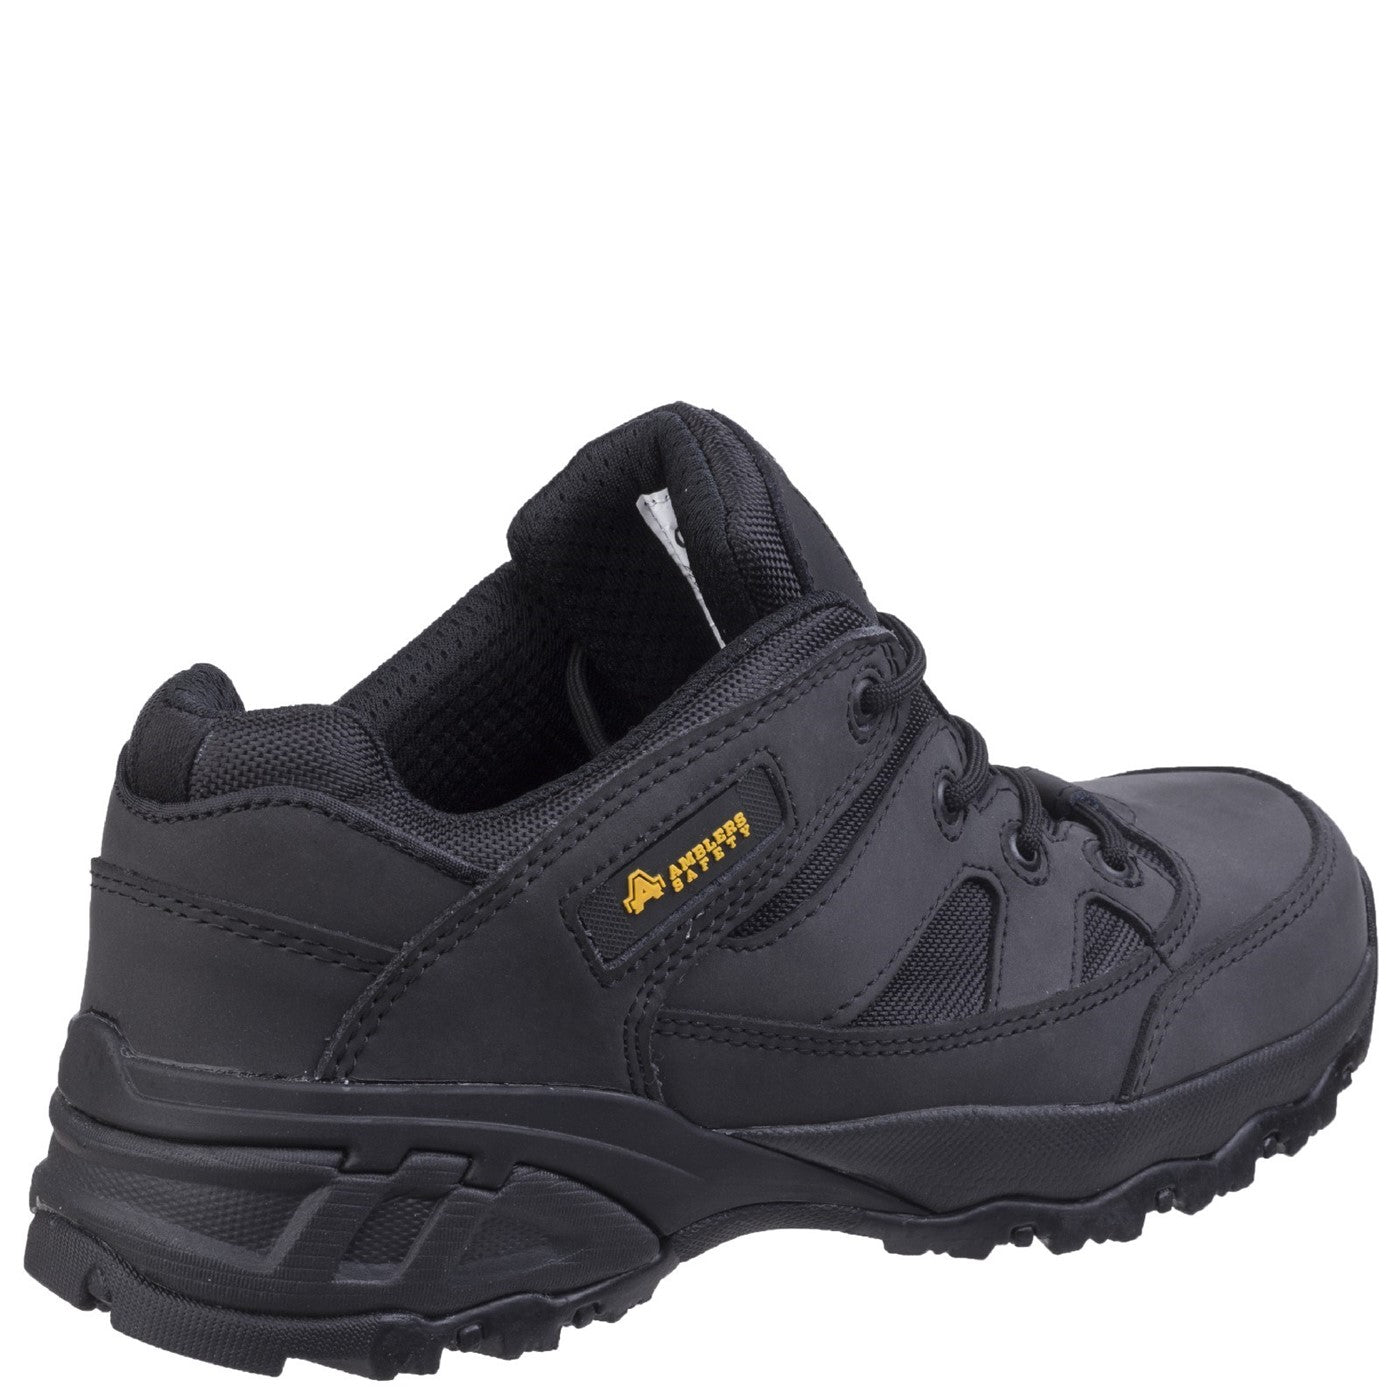 Men's Amblers Safety FS68C Fully Composite Metal Free Safety Trainer